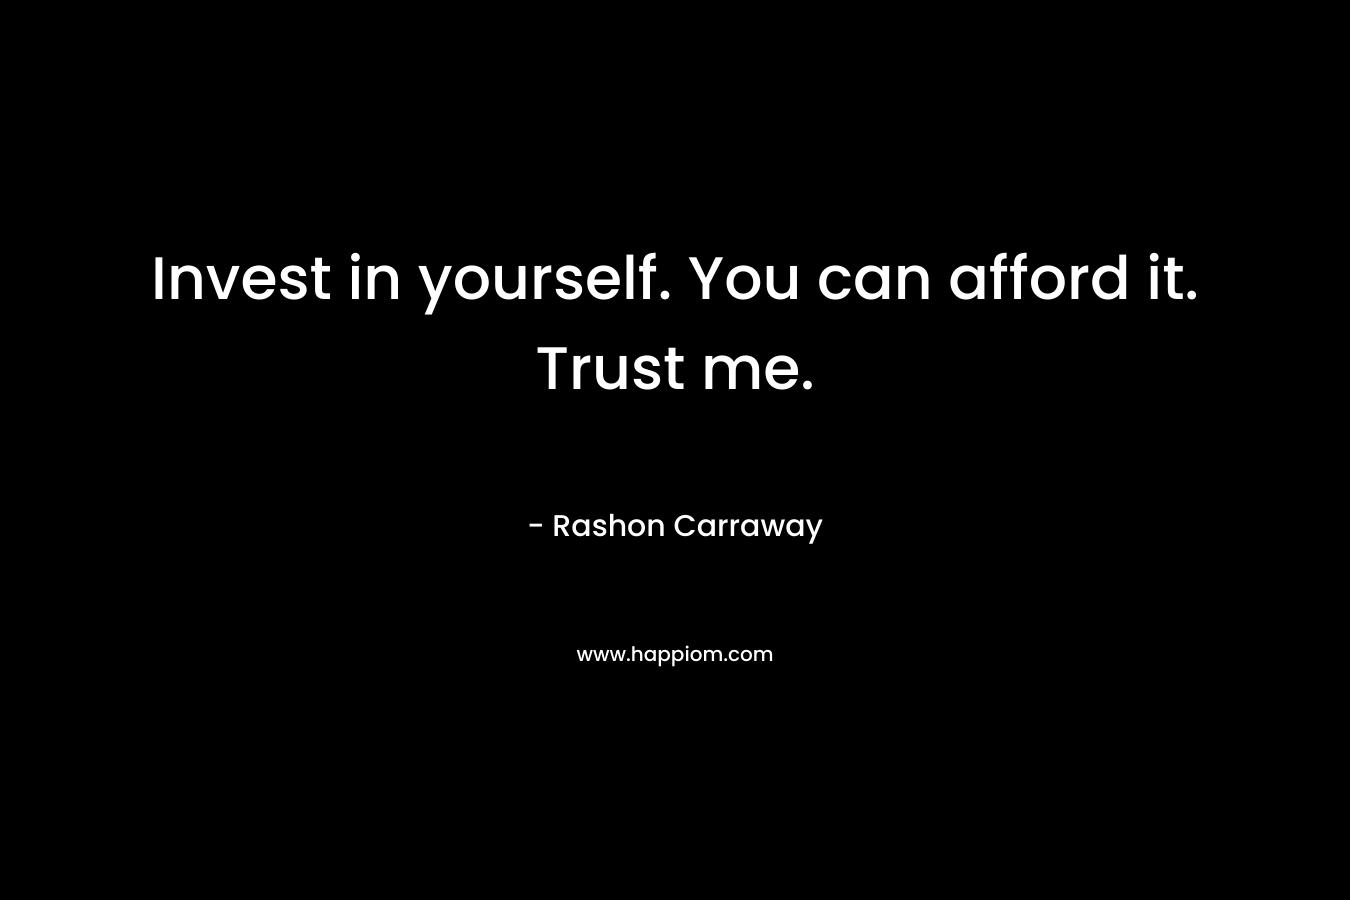 Invest in yourself. You can afford it. Trust me.